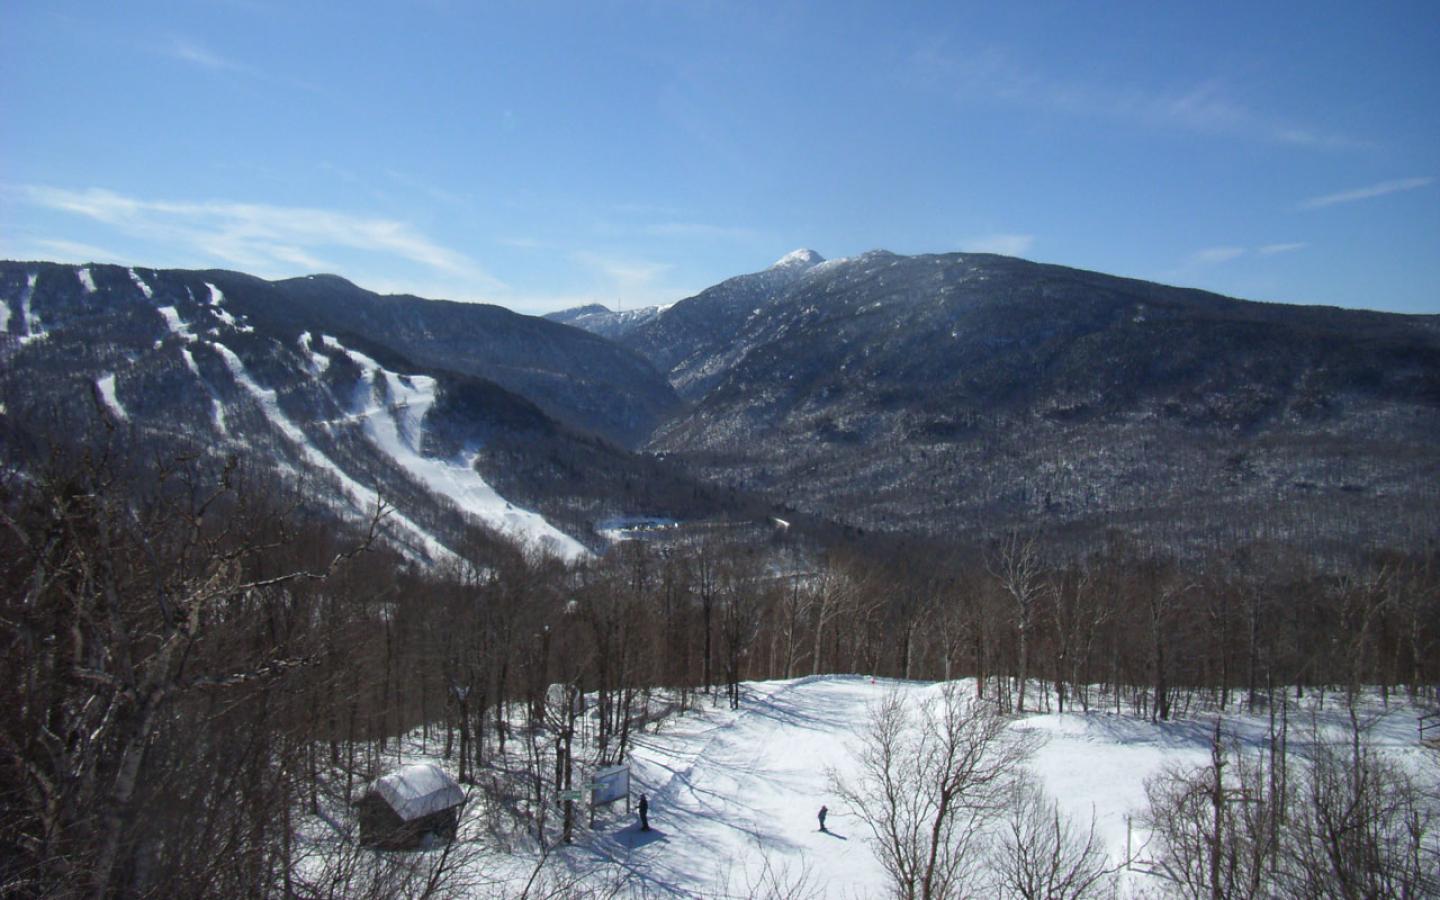 Smuggler's Notch, Vermont - View over Sterling Peak Wallpaper #4 1440 x 900 